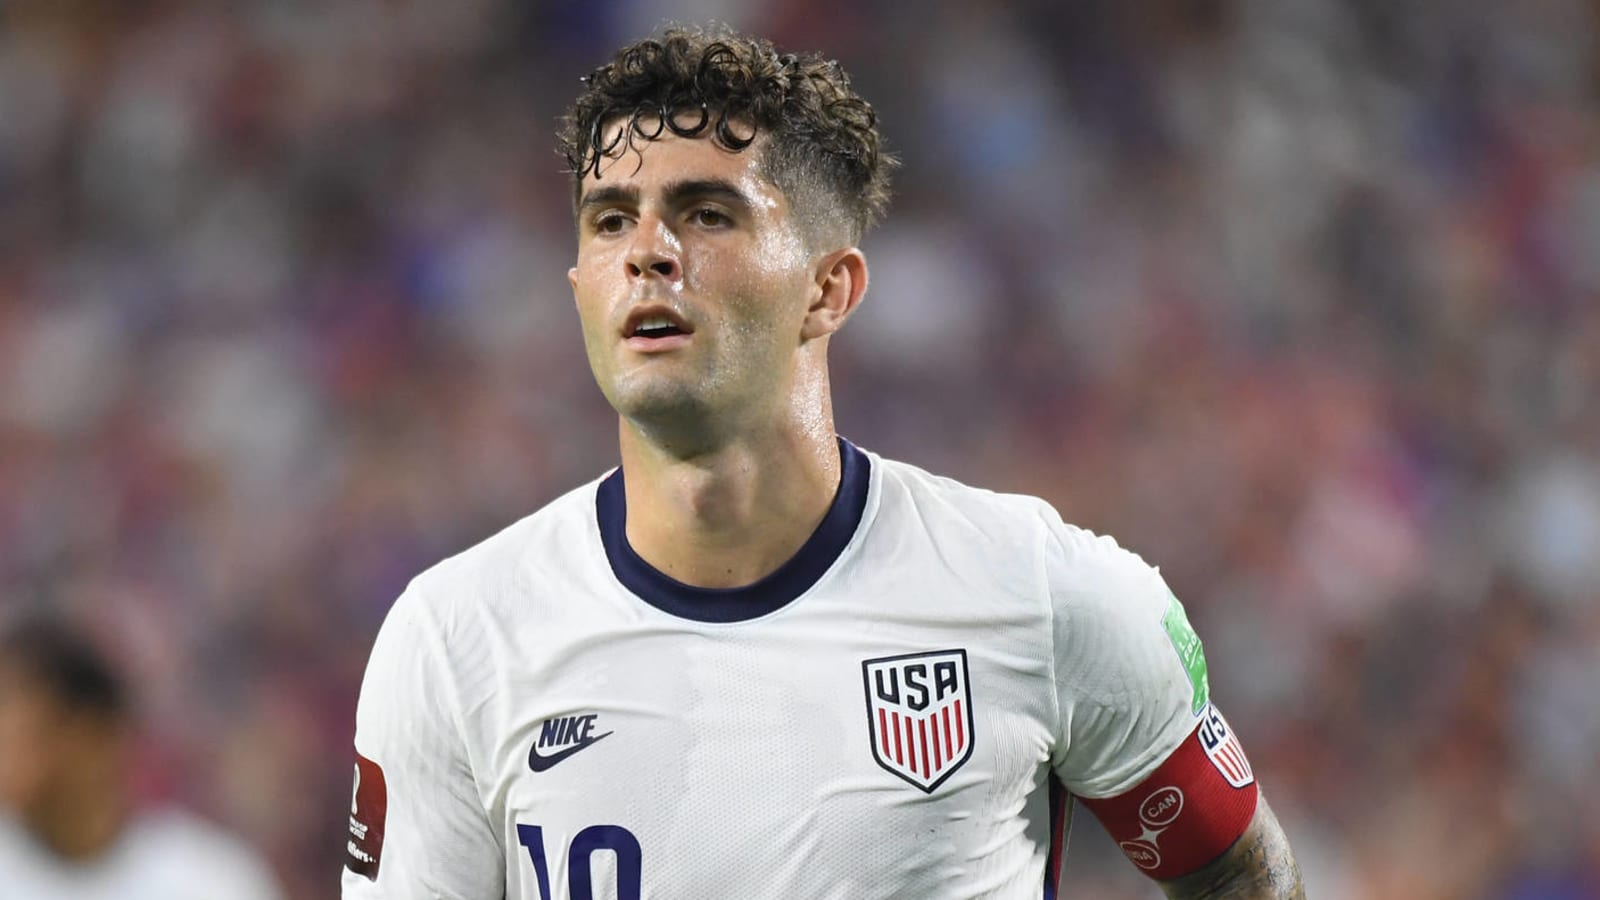 USMNT wanted to 'send a message' with Pulisic's celebration